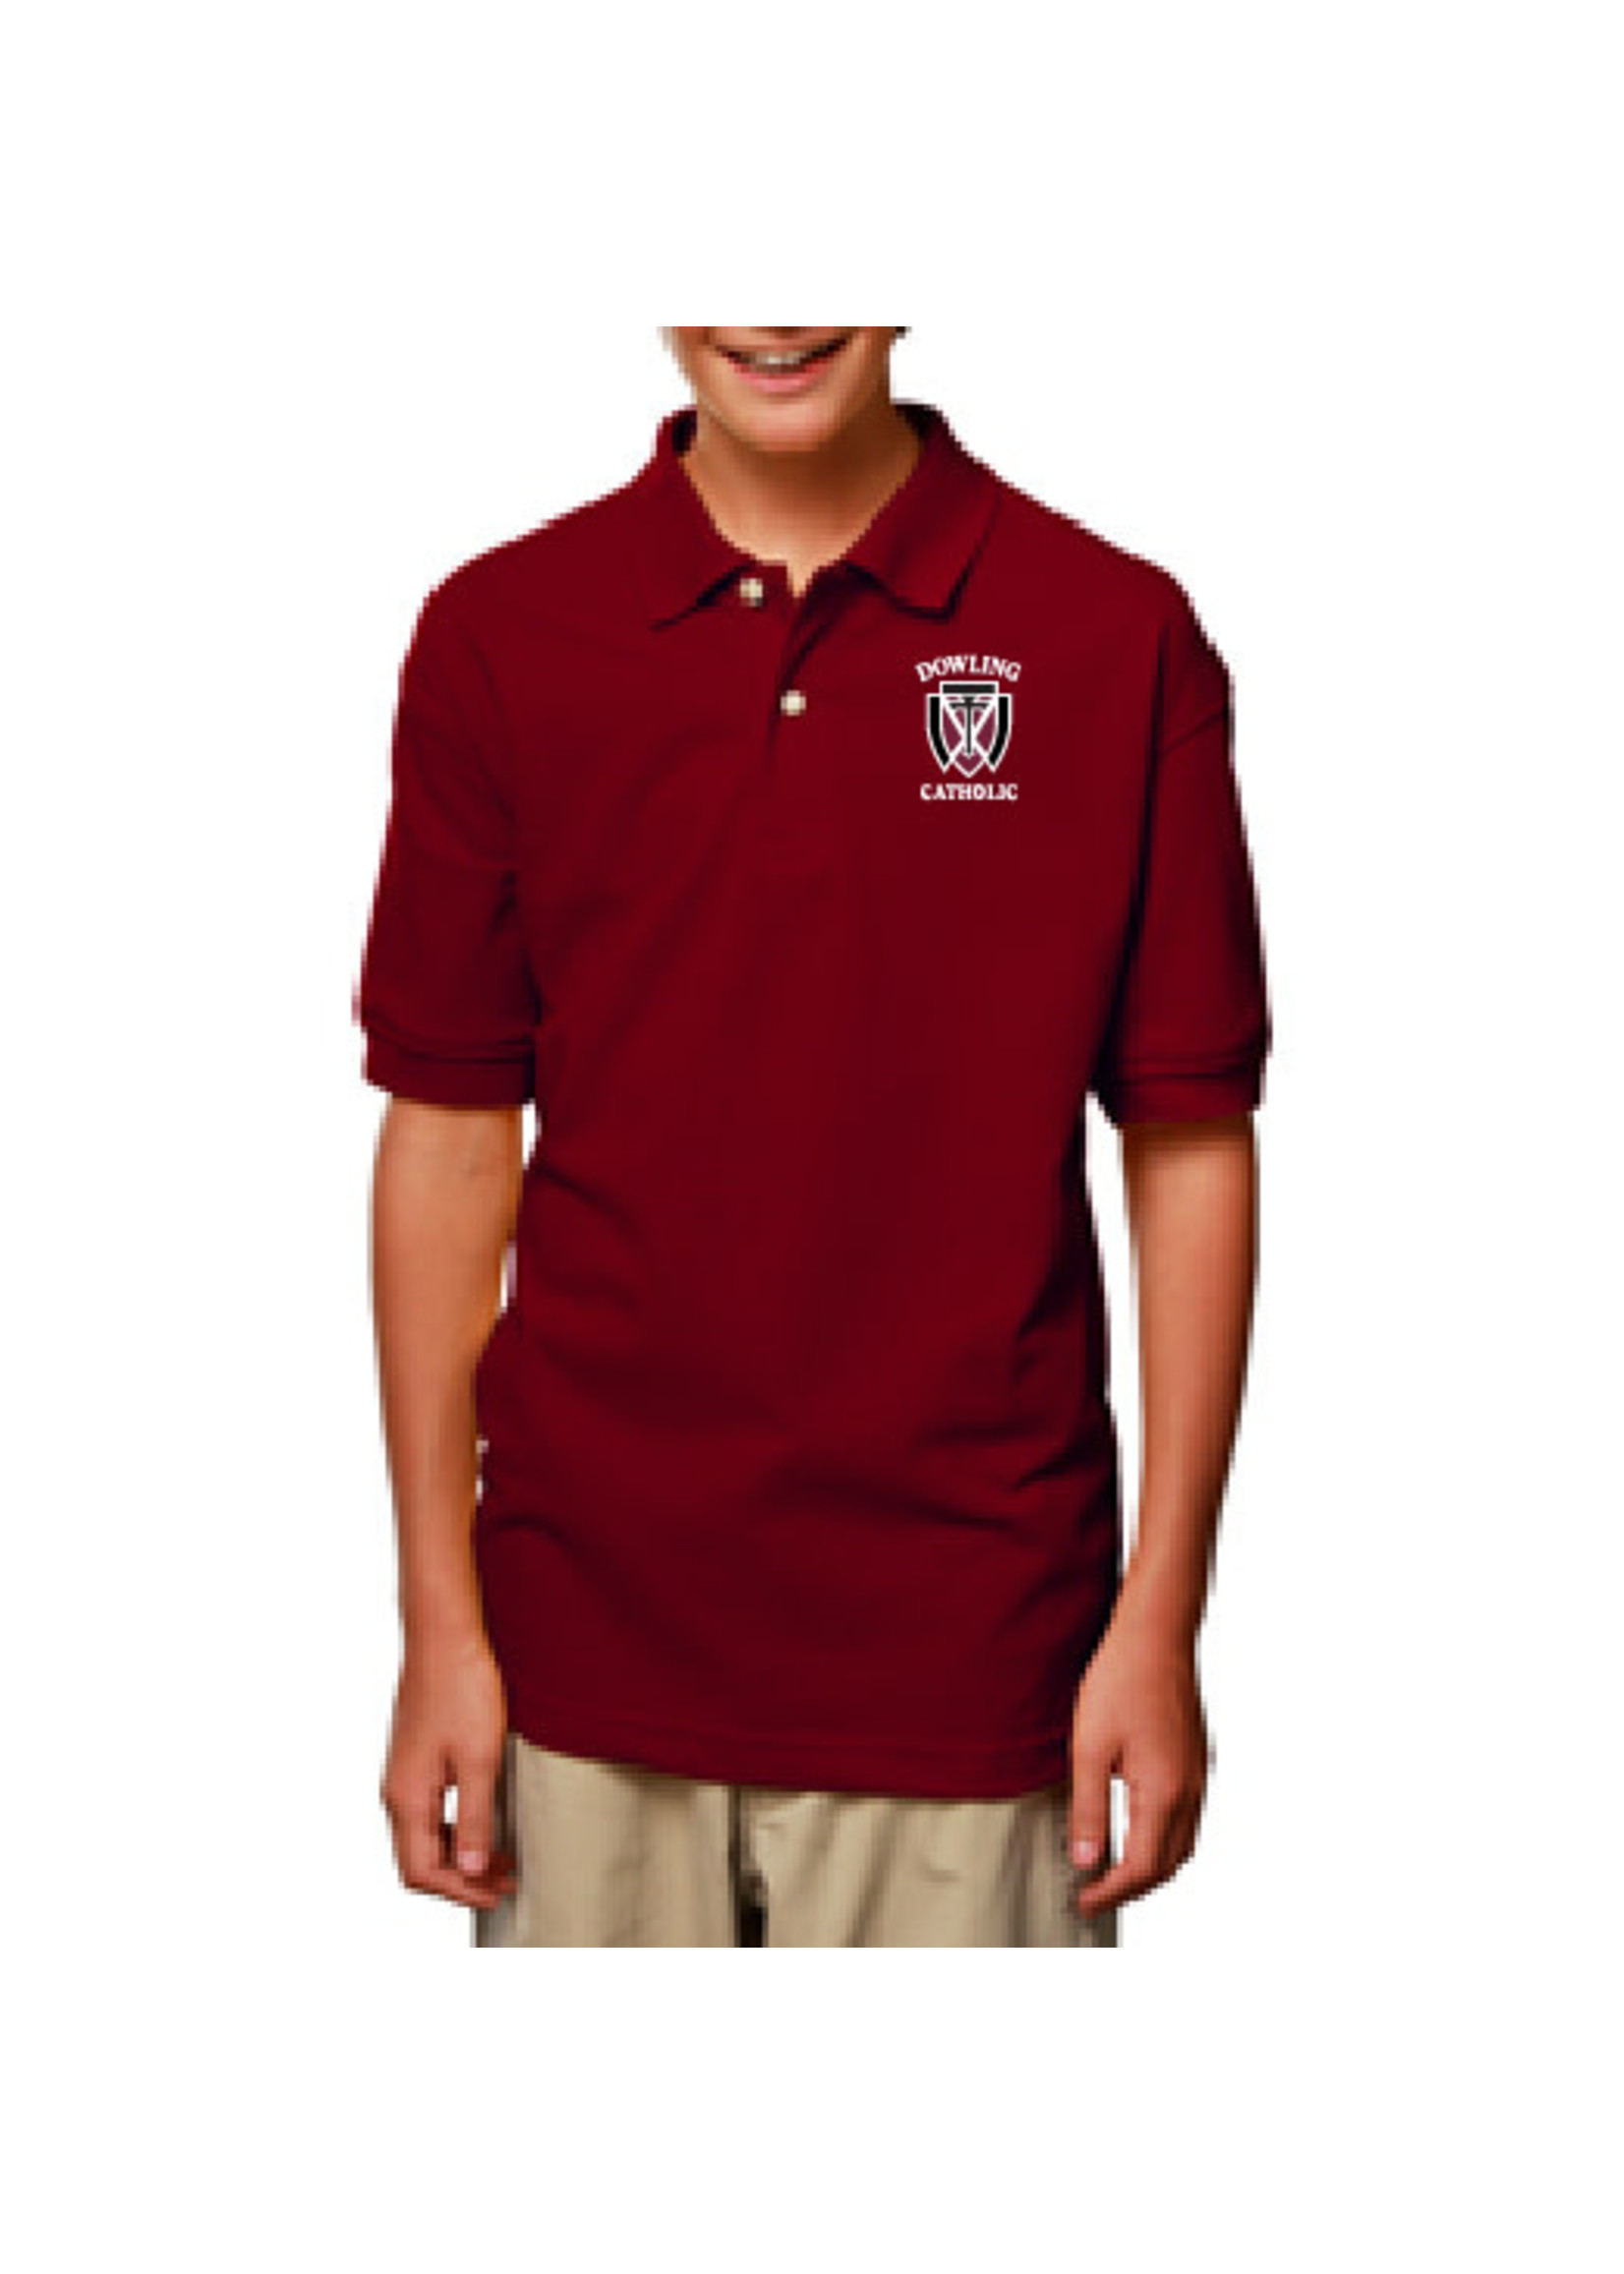 Blue Generation Youth Short Sleeve Cotton Polo - ONLINE